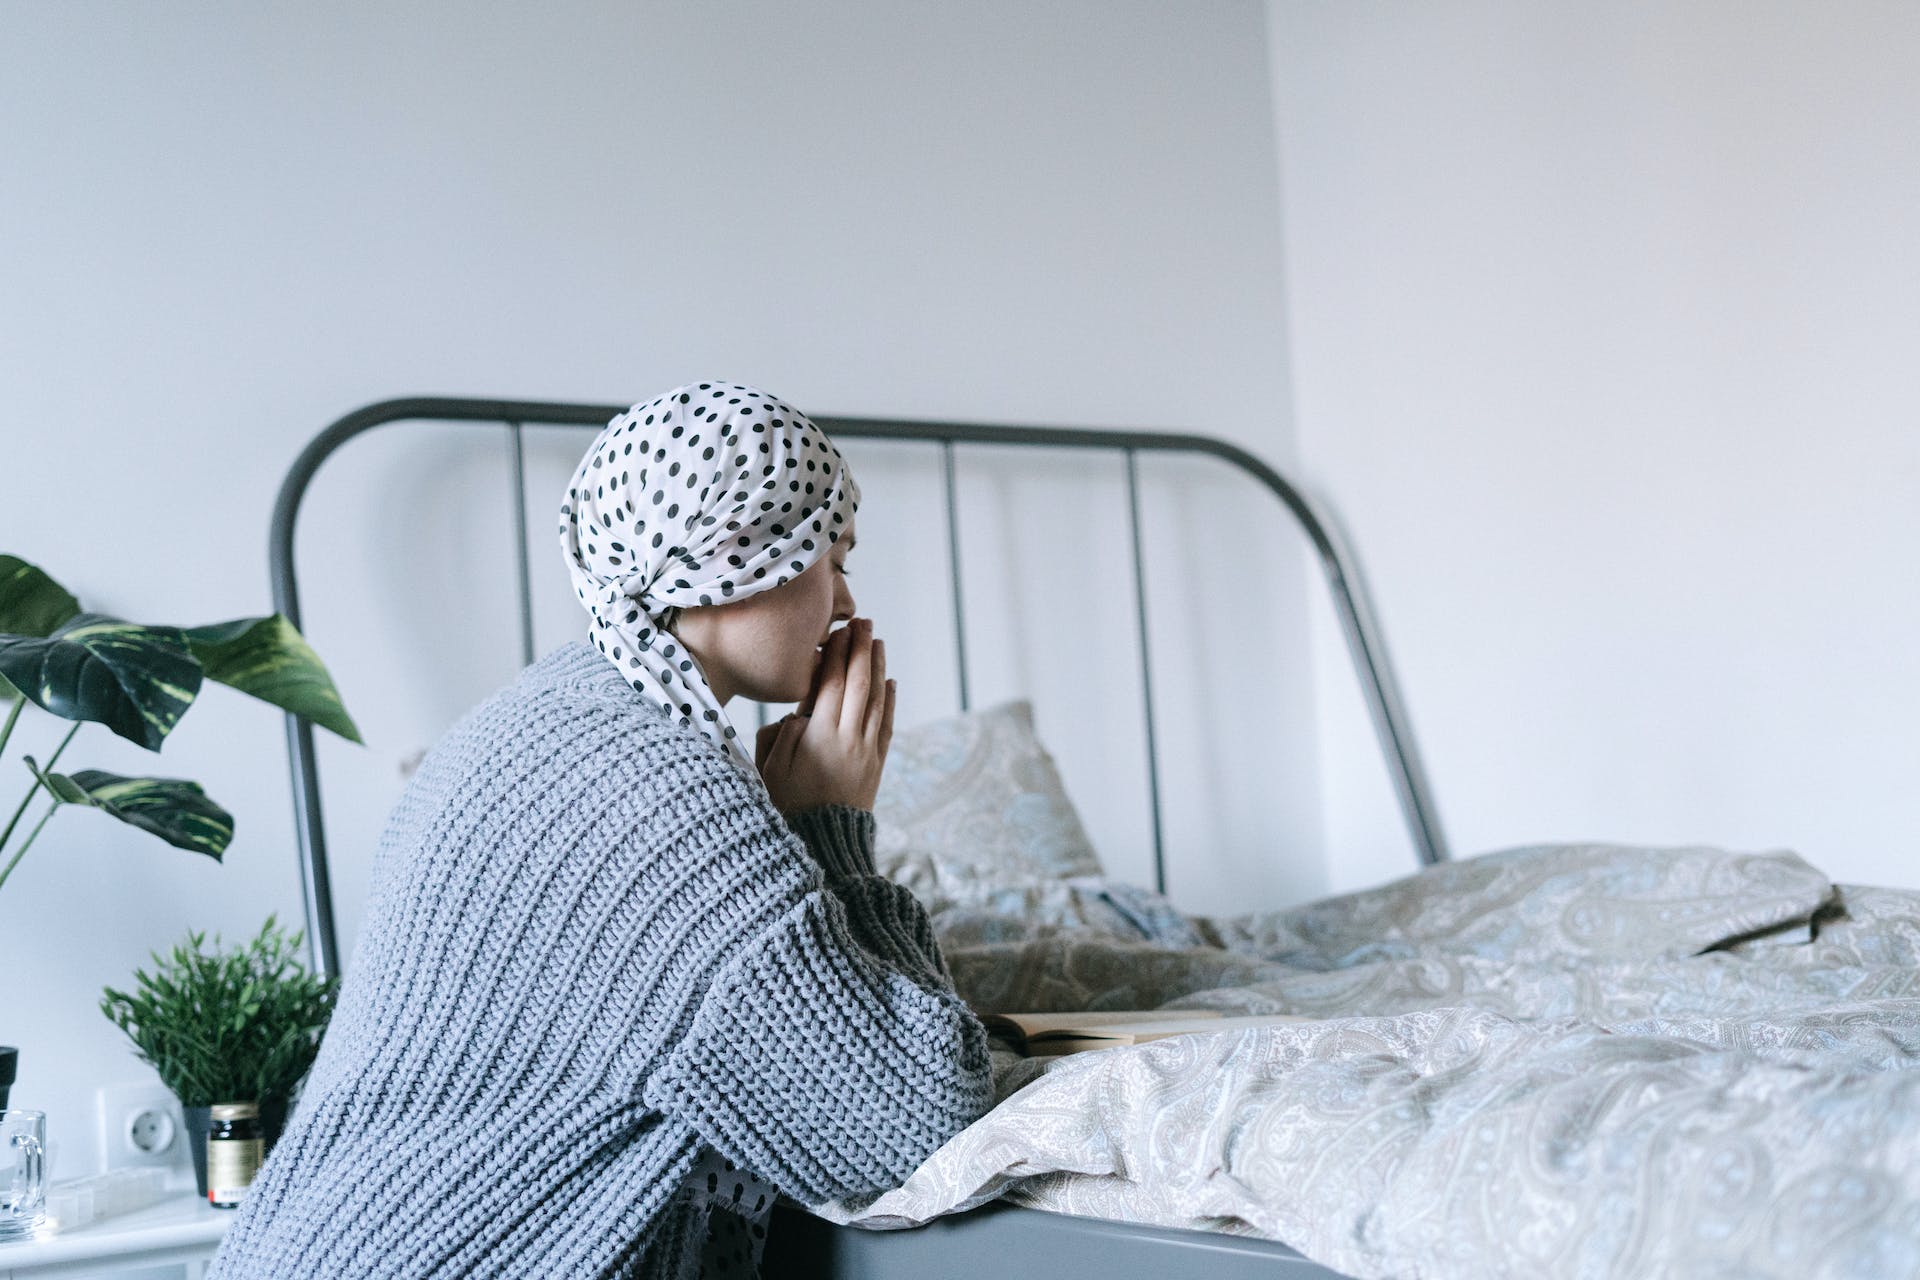 Cancer patient at home. | Source: Pexels